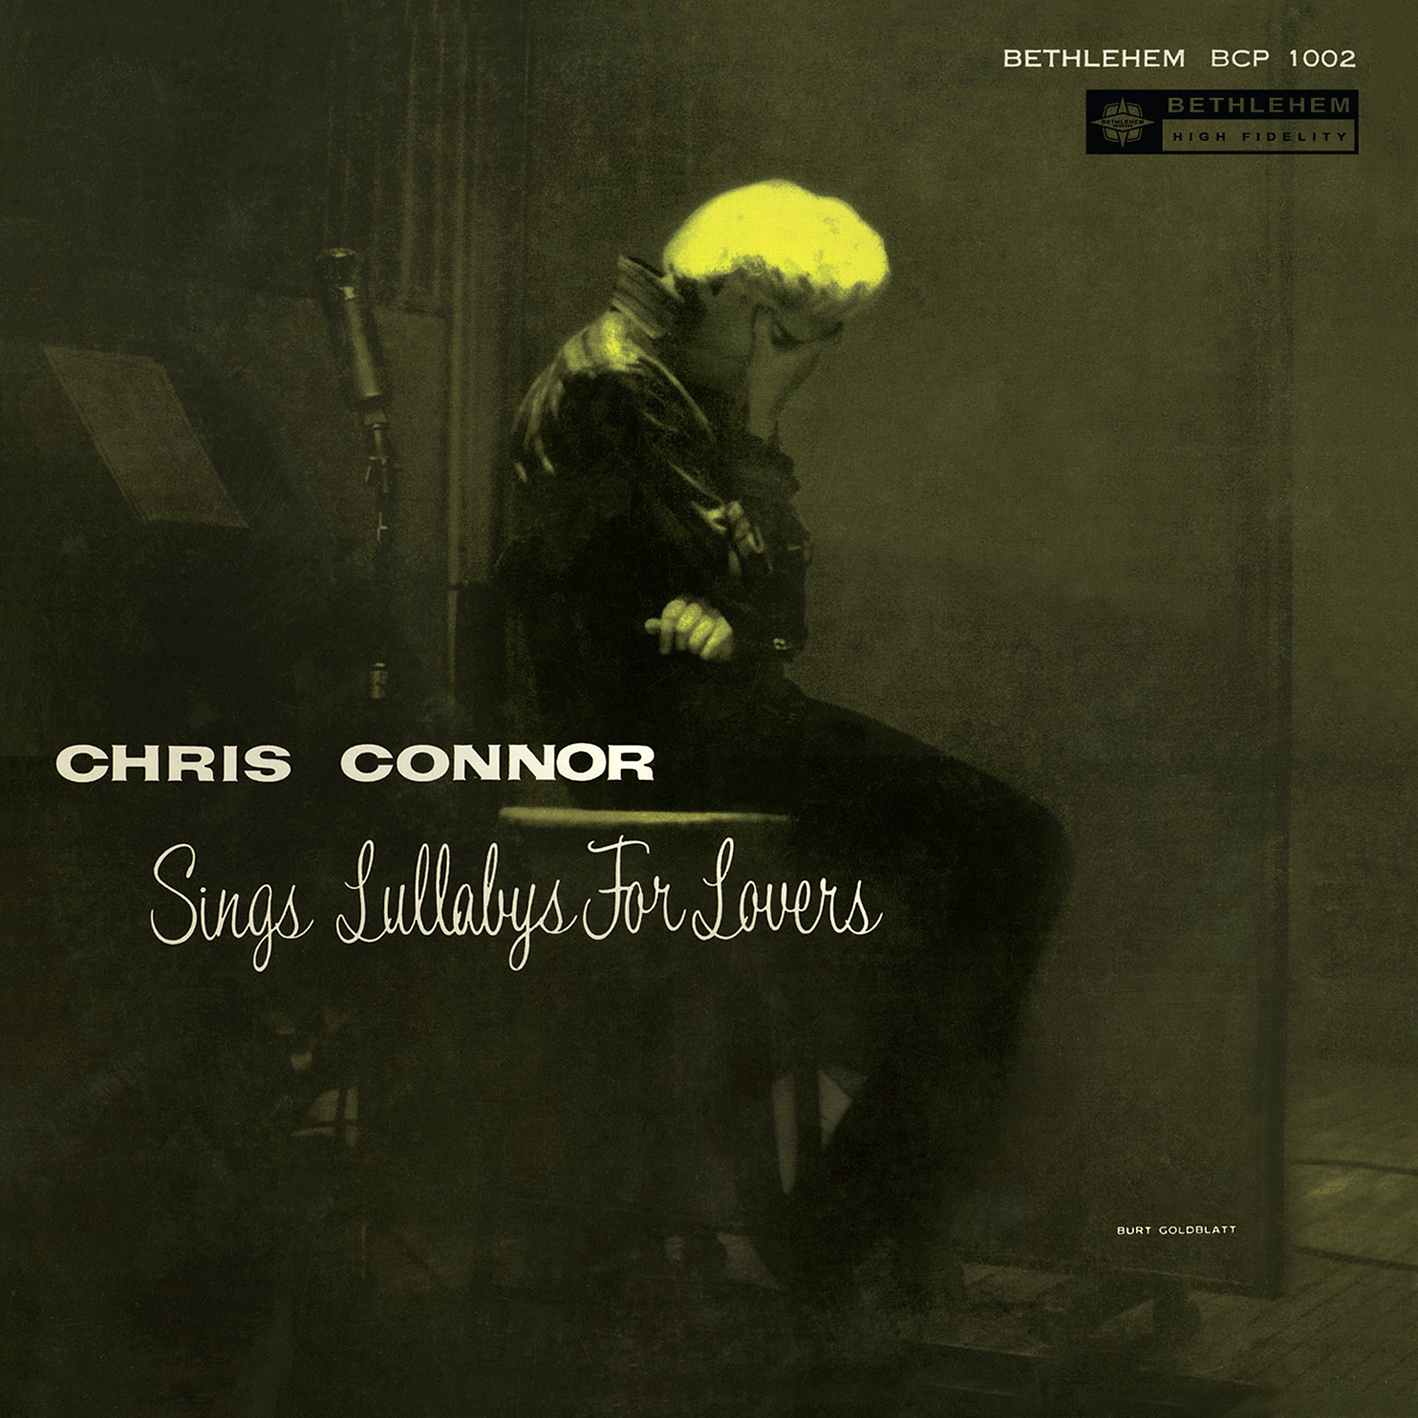 Chris Connor – Chris Connor Sings Lullabys For Lovers (1954/2013) [PrestoClassical FLAC 24bit/96kHz]